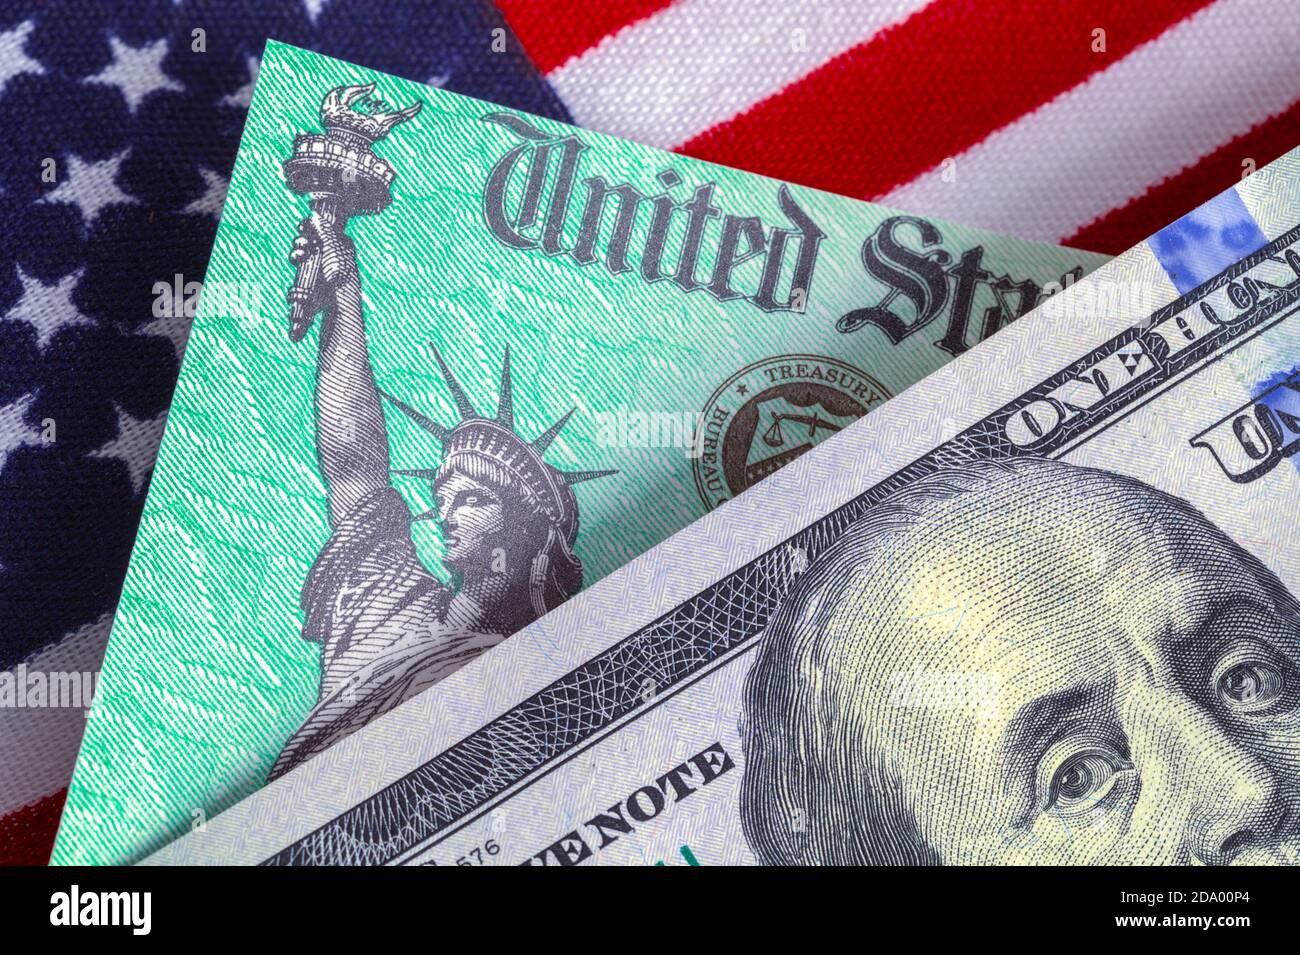 One Hundred Dollar Bill with Tax Retrun Check and American Flag. Stock Photo